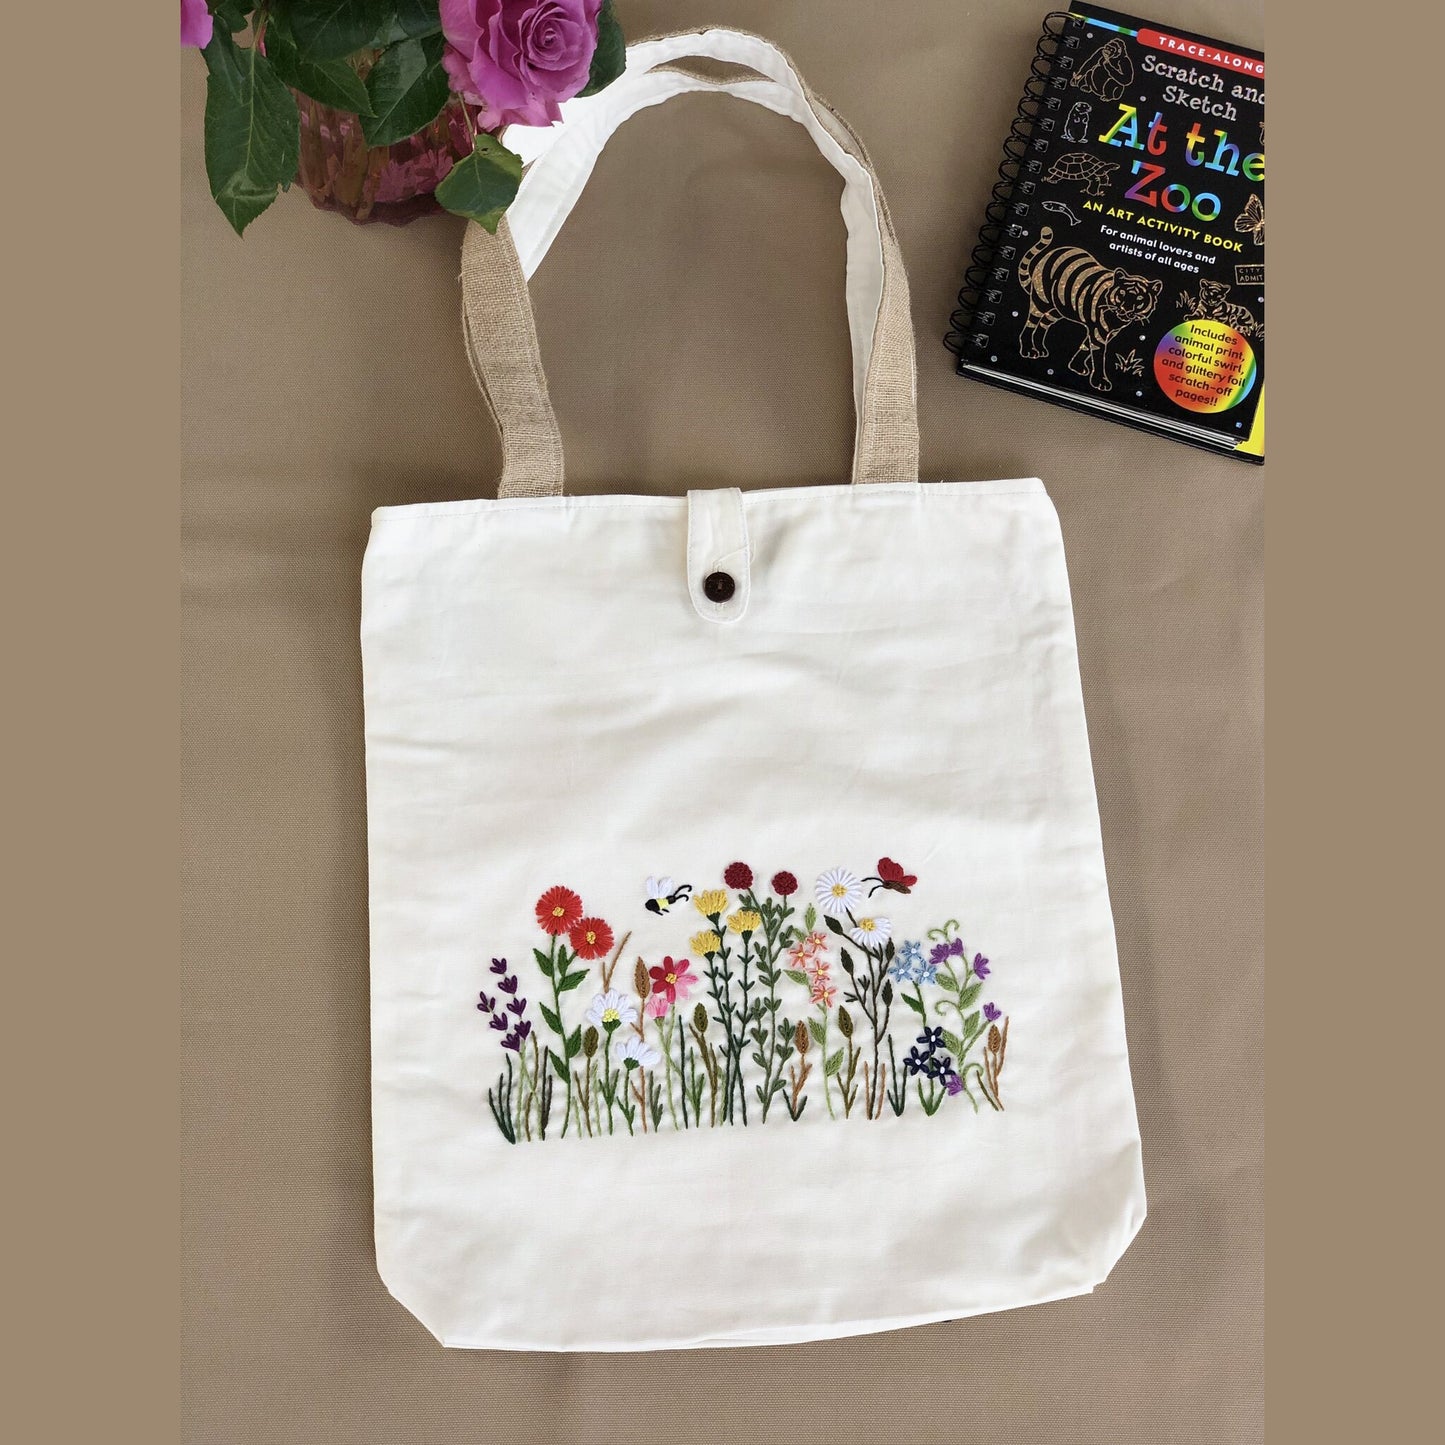 Ready To Ship, Handmade Embroidery Floral Tote Bag Wild Flowers